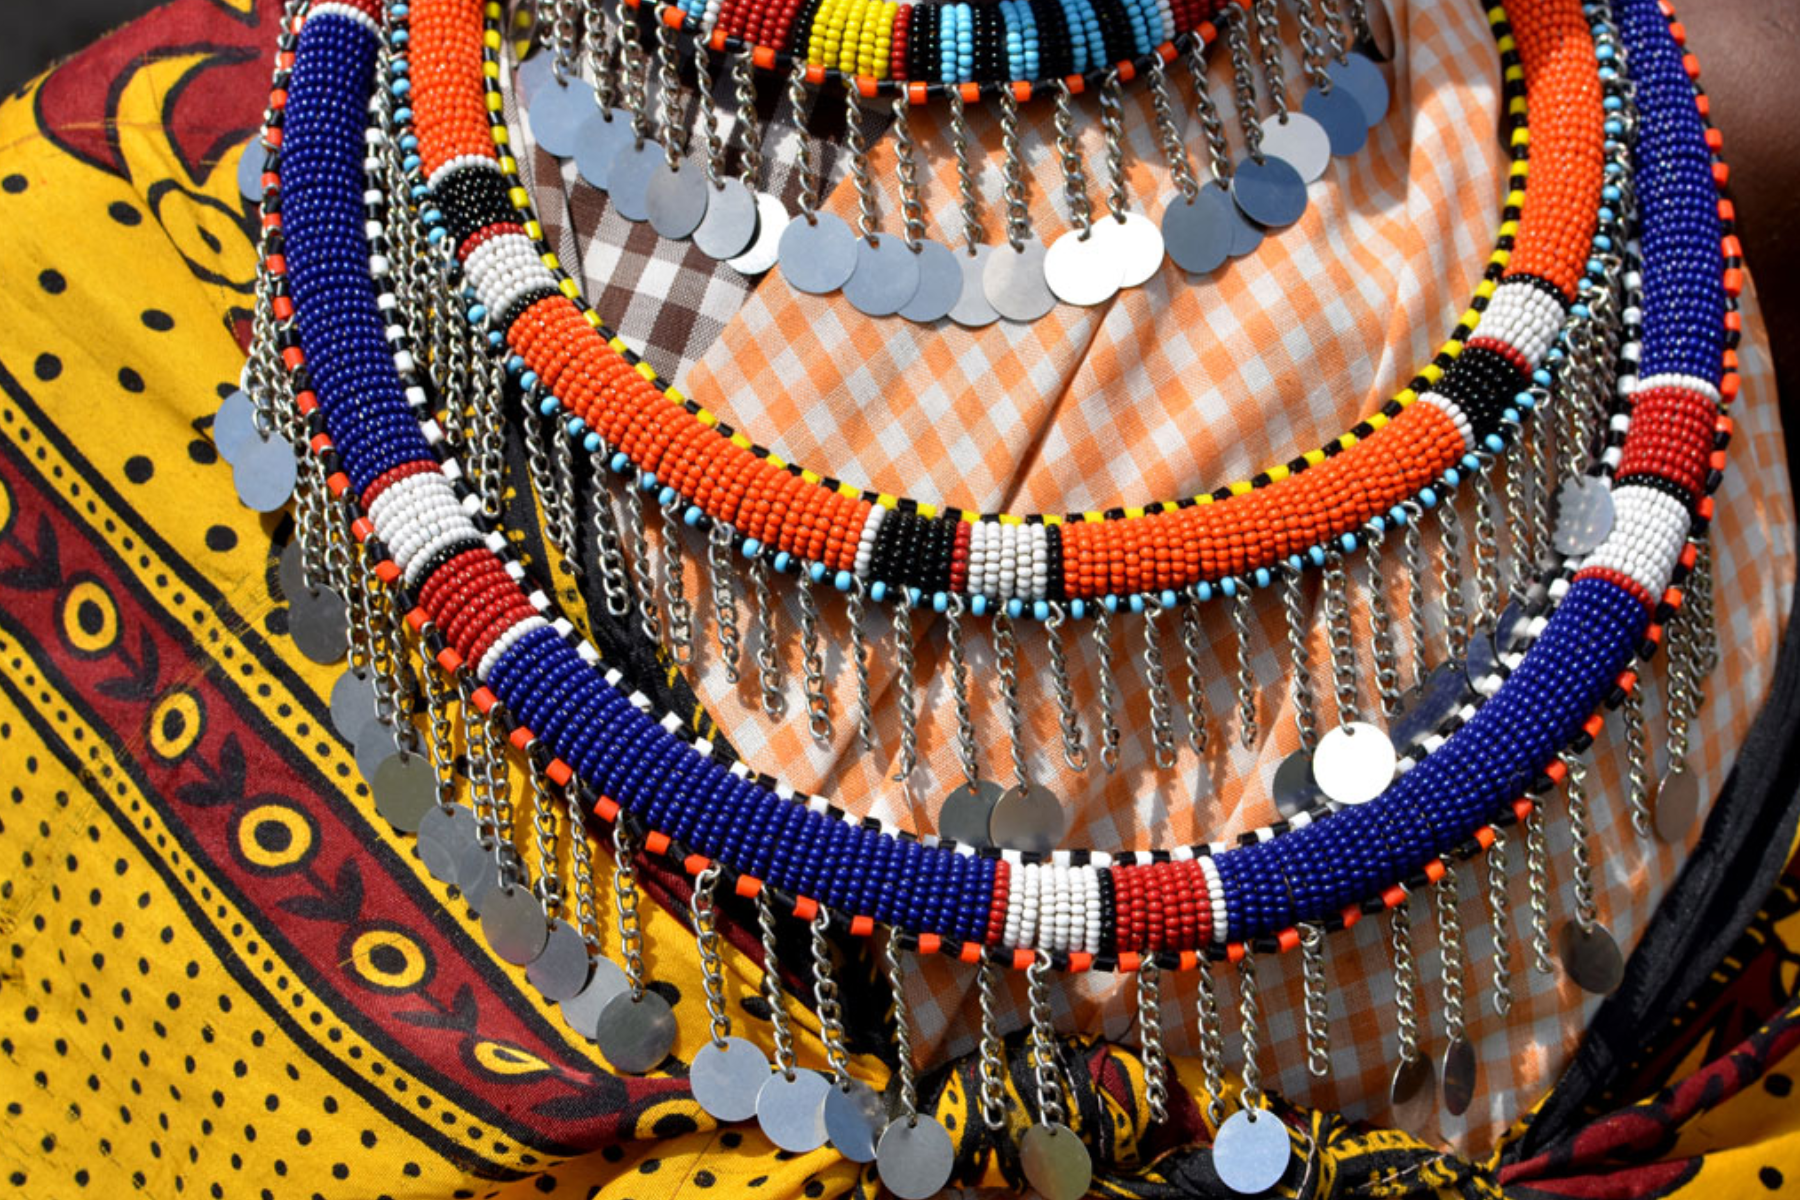 A necklace made of colorful beads